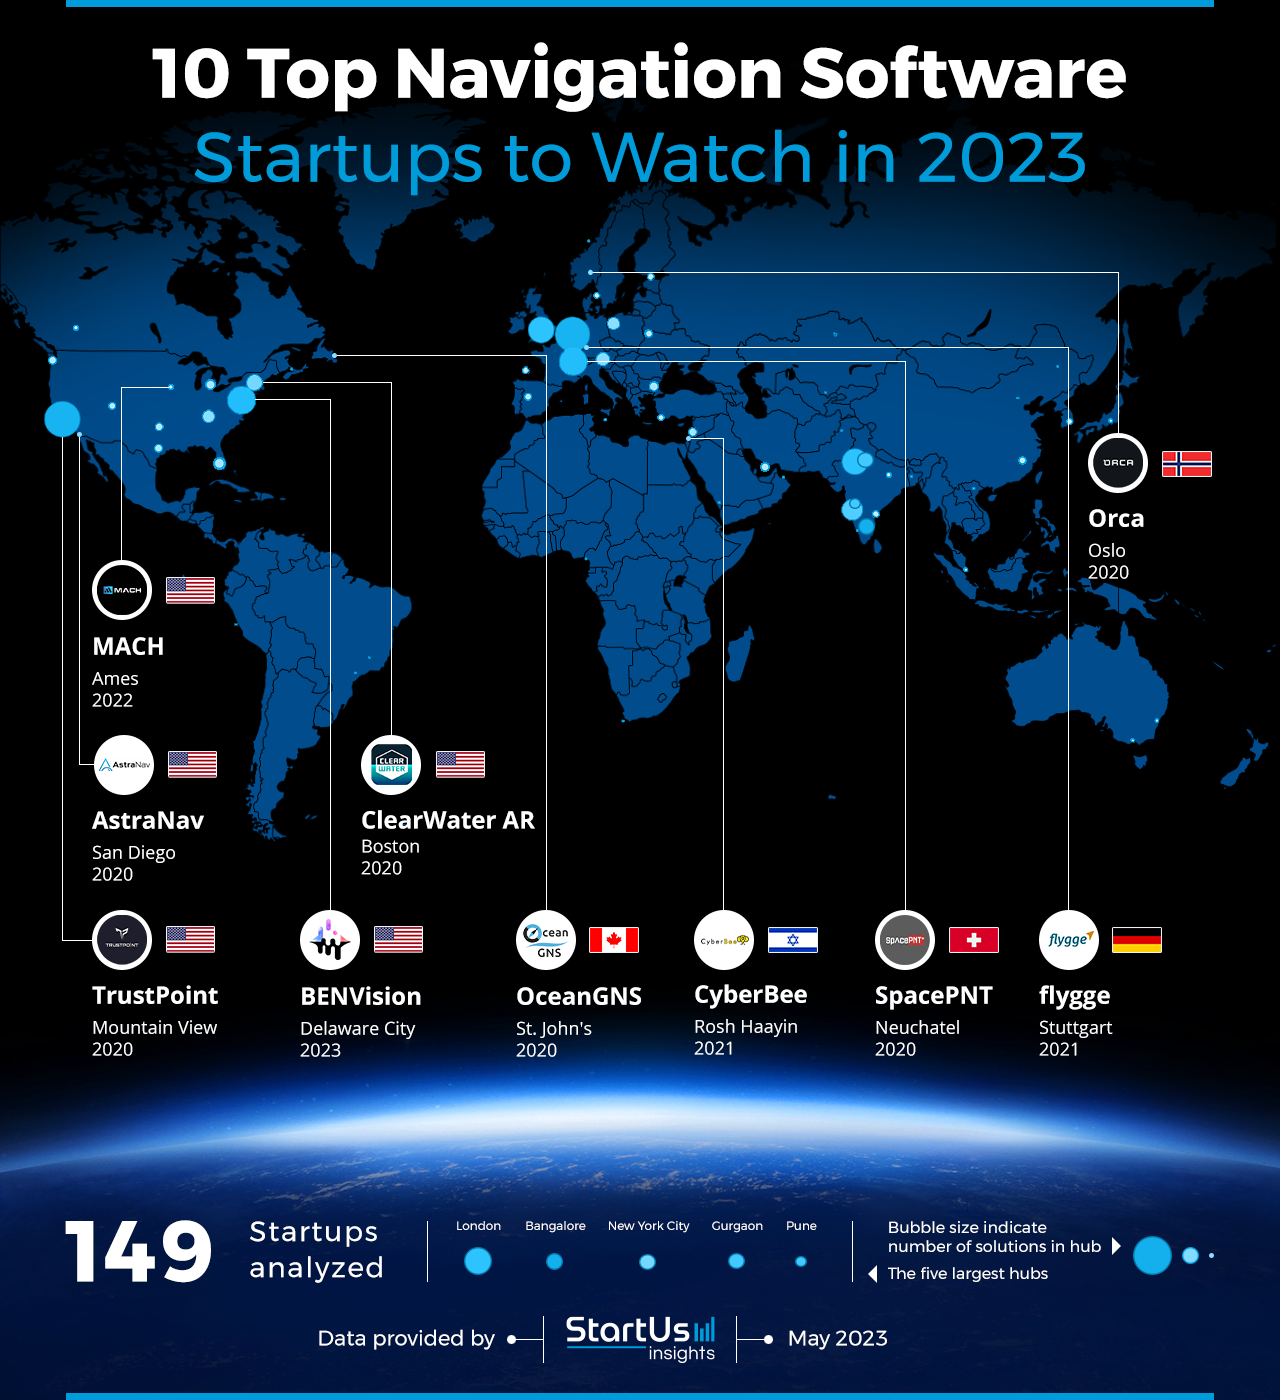 10 Top Navigation Software Startups to Watch in 2023